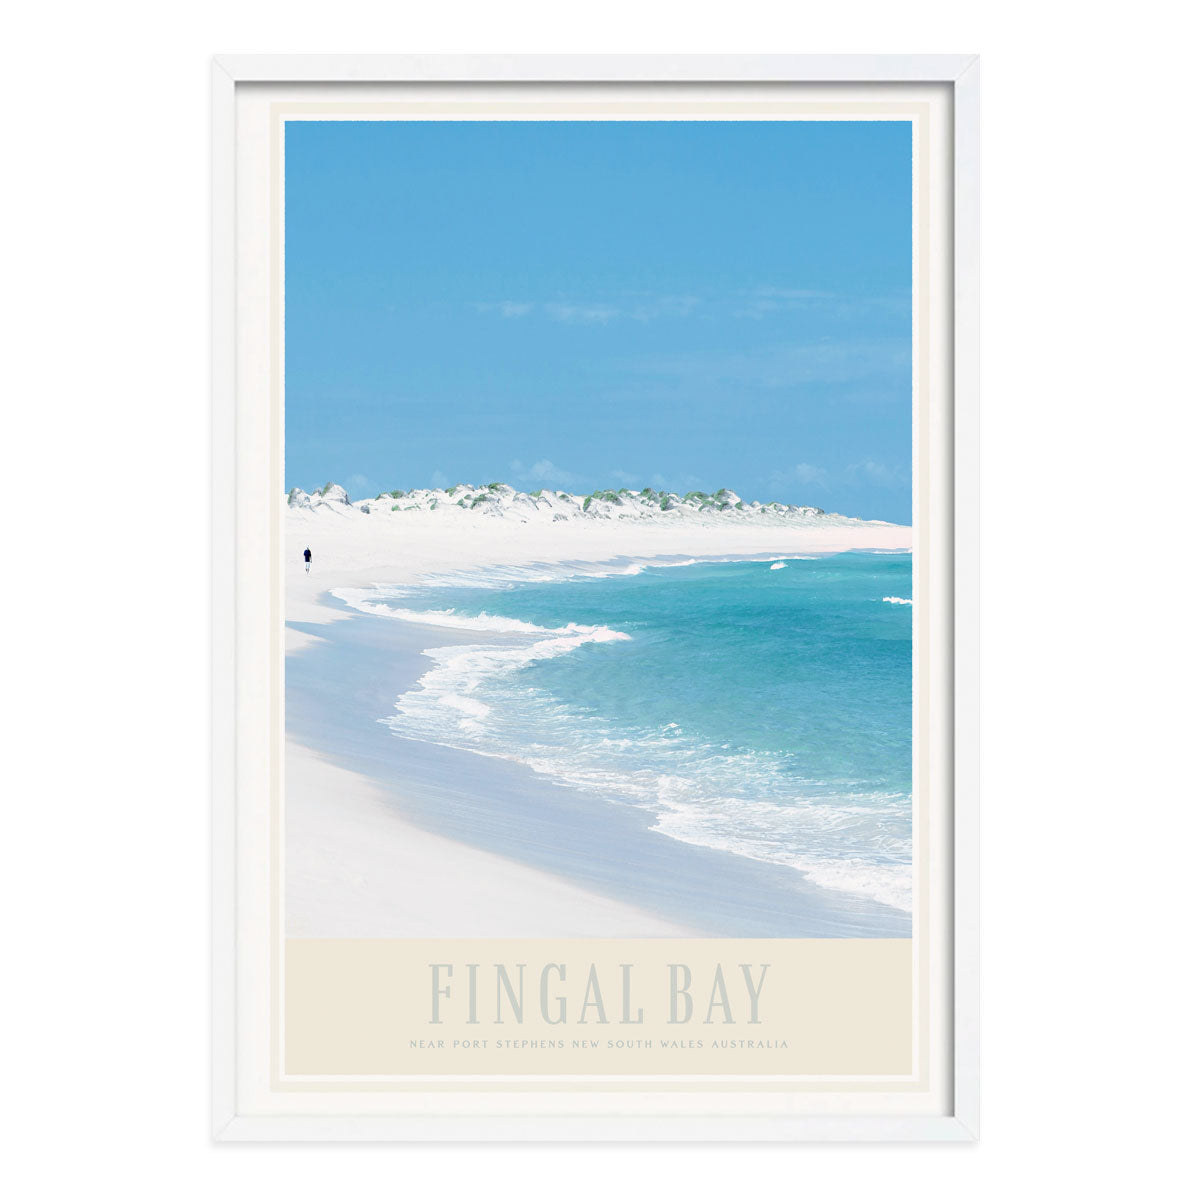 Fingal bay vintage retro poster print in frame by places we luv